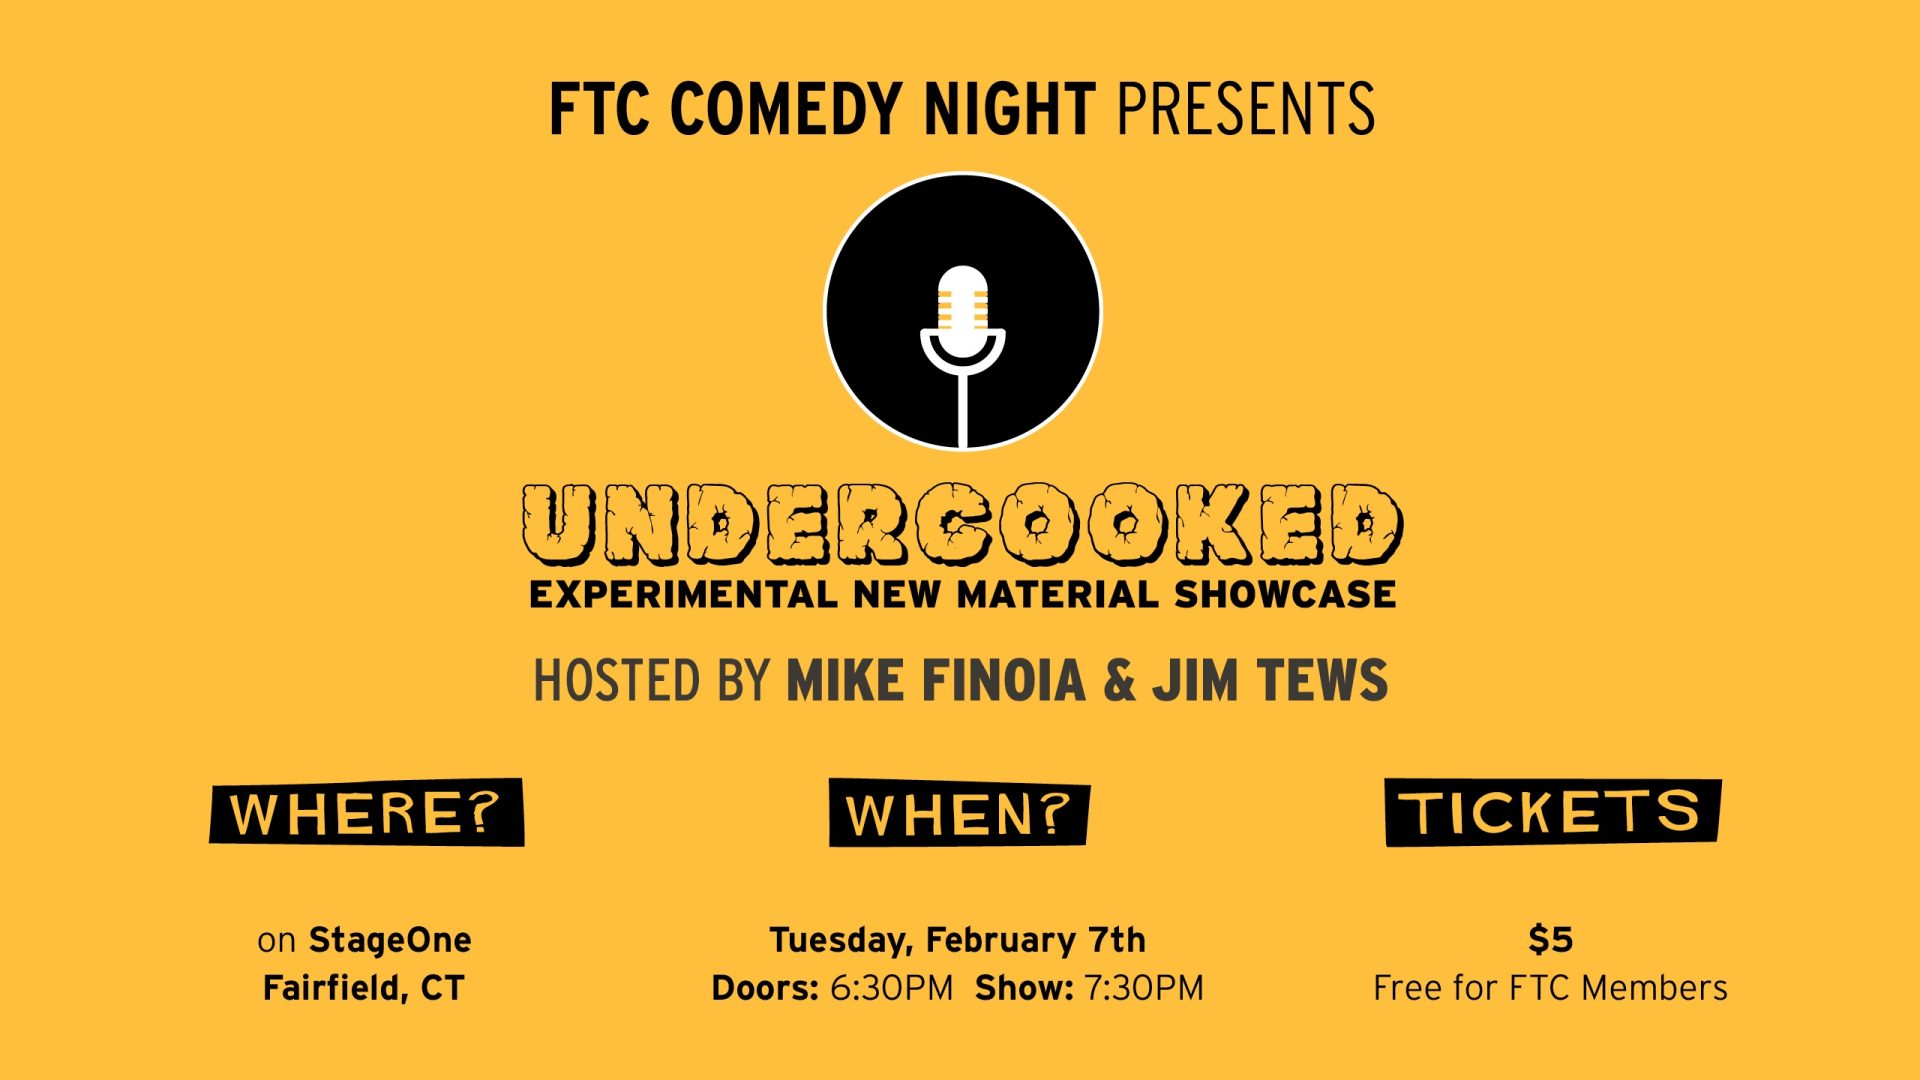 FTC Comedy Presents: Undercooked: An Experimental New Material Showcase